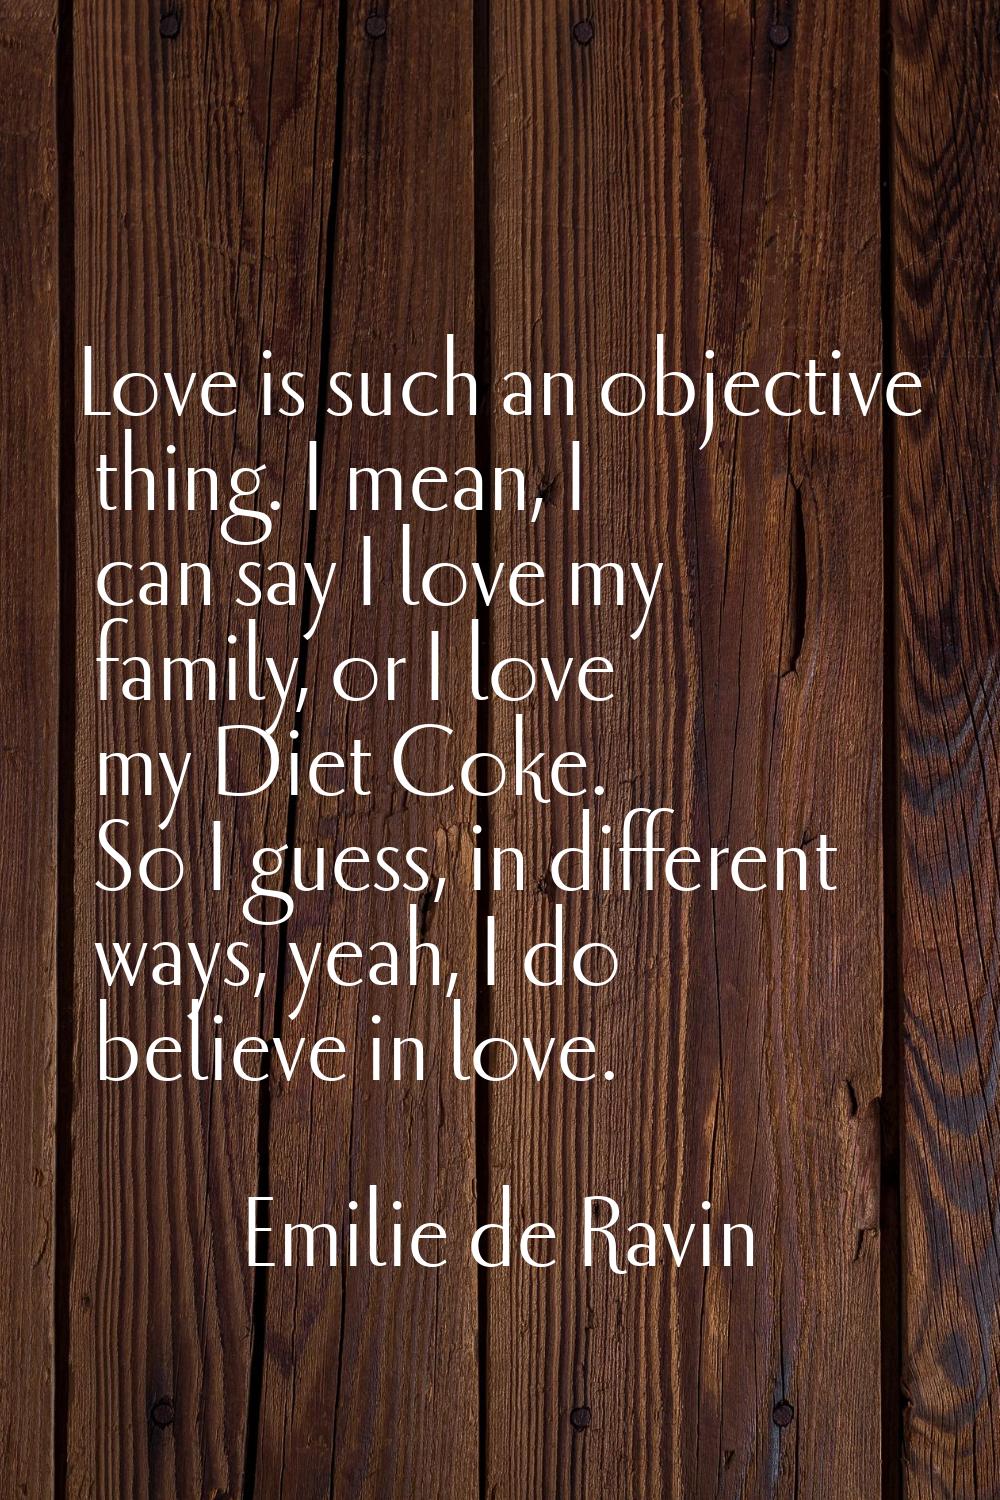 Love is such an objective thing. I mean, I can say I love my family, or I love my Diet Coke. So I g